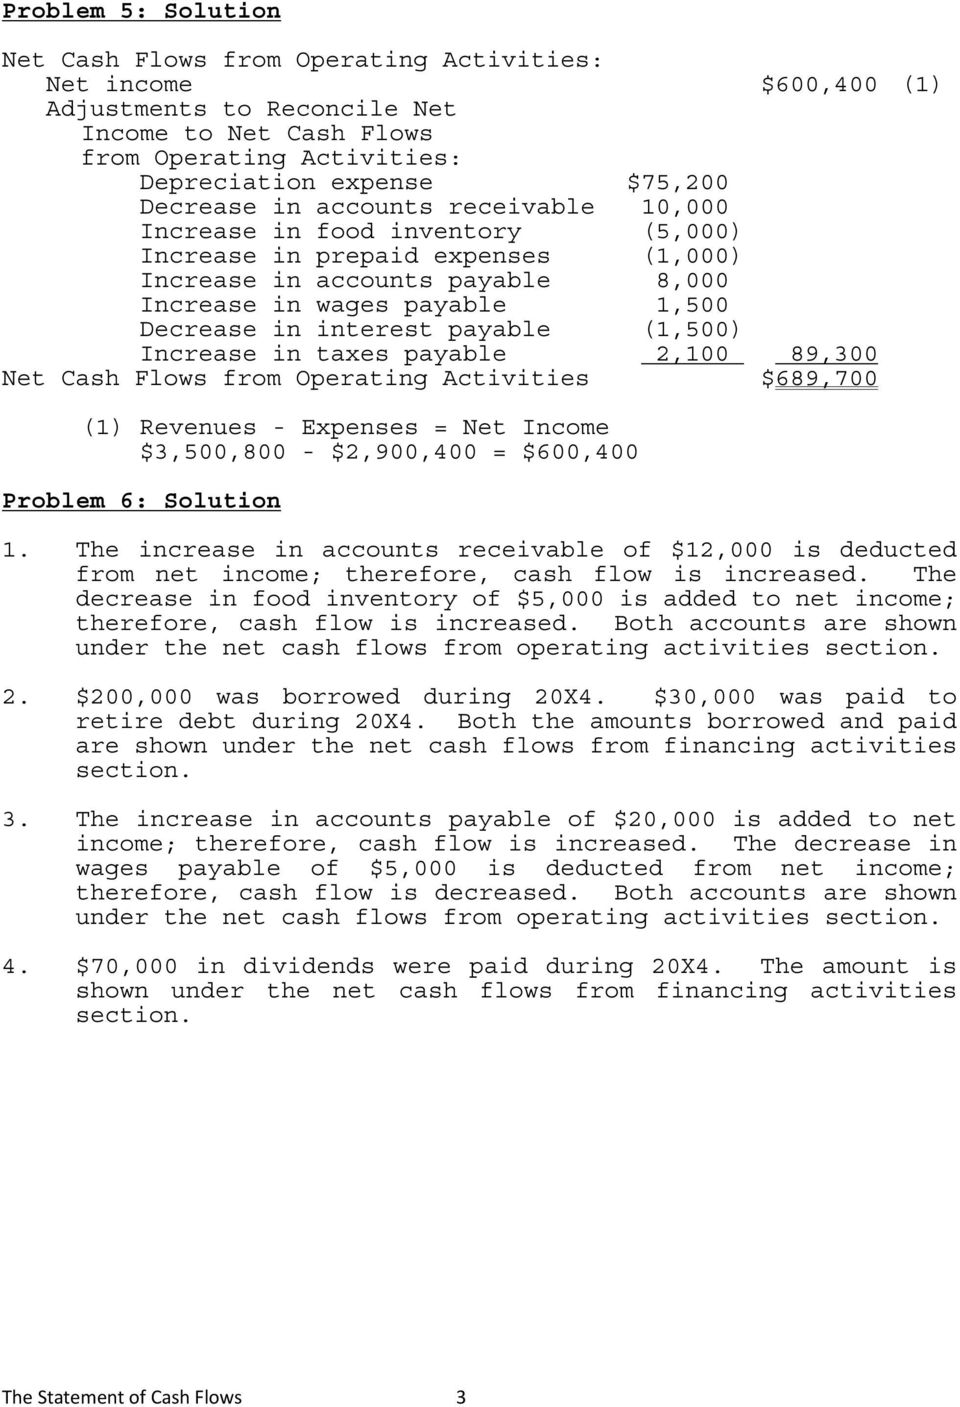 payable (1,500) Increase in taxes payable 2,100 89,300 Net Cash Flows from Operating Activities $689,700 (1) Revenues - Expenses = Net Income $3,500,800 - $2,900,400 = $600,400 Problem 6: Solution 1.